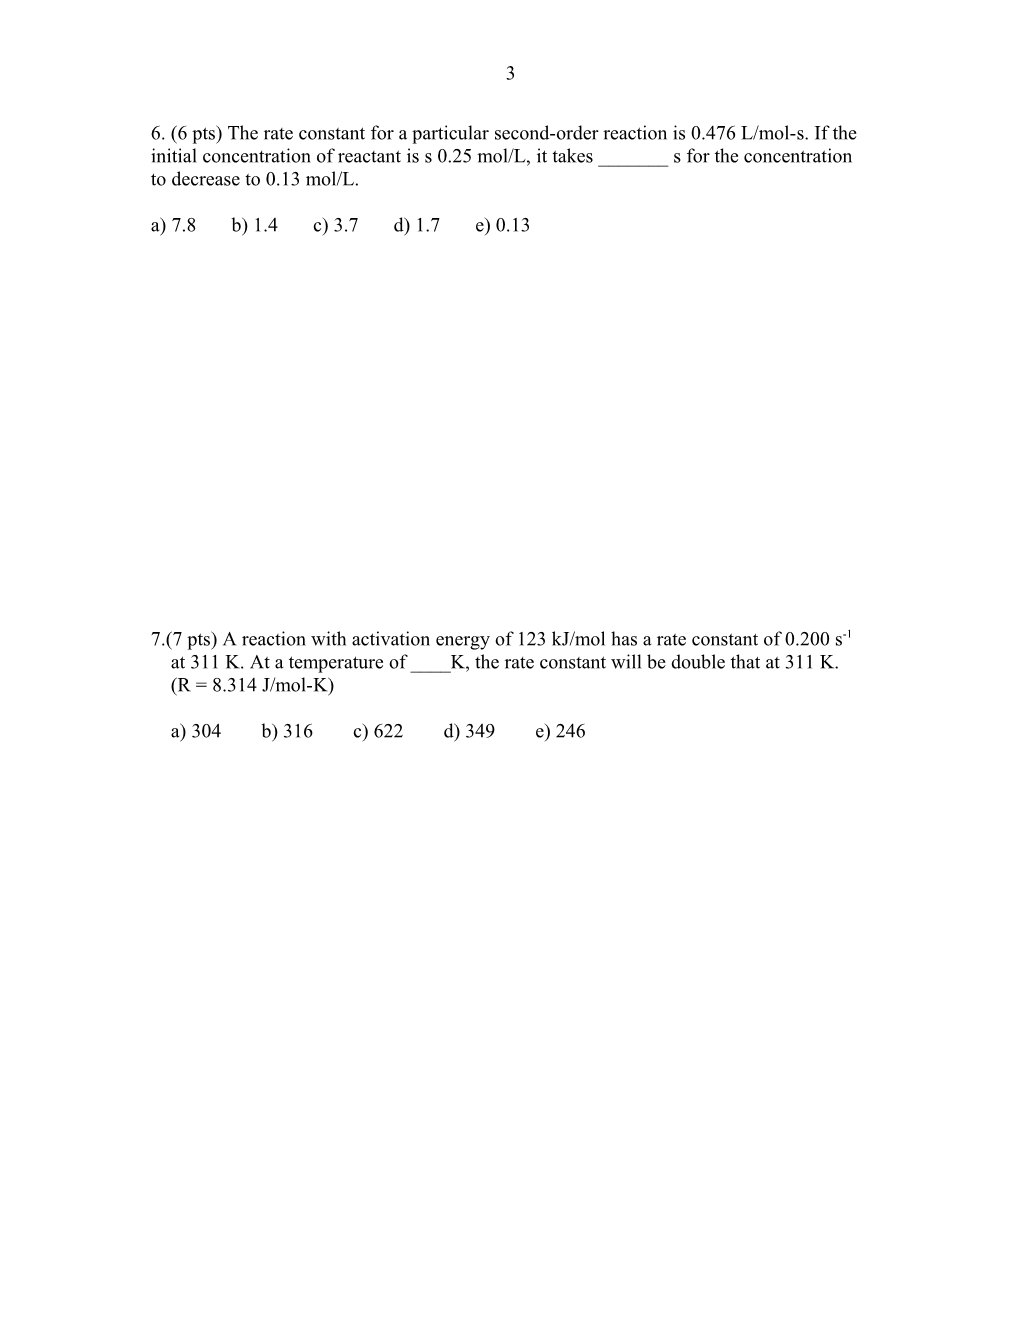 2. (6 Pts) What Is the Value of the Rate Constant in Question 1?